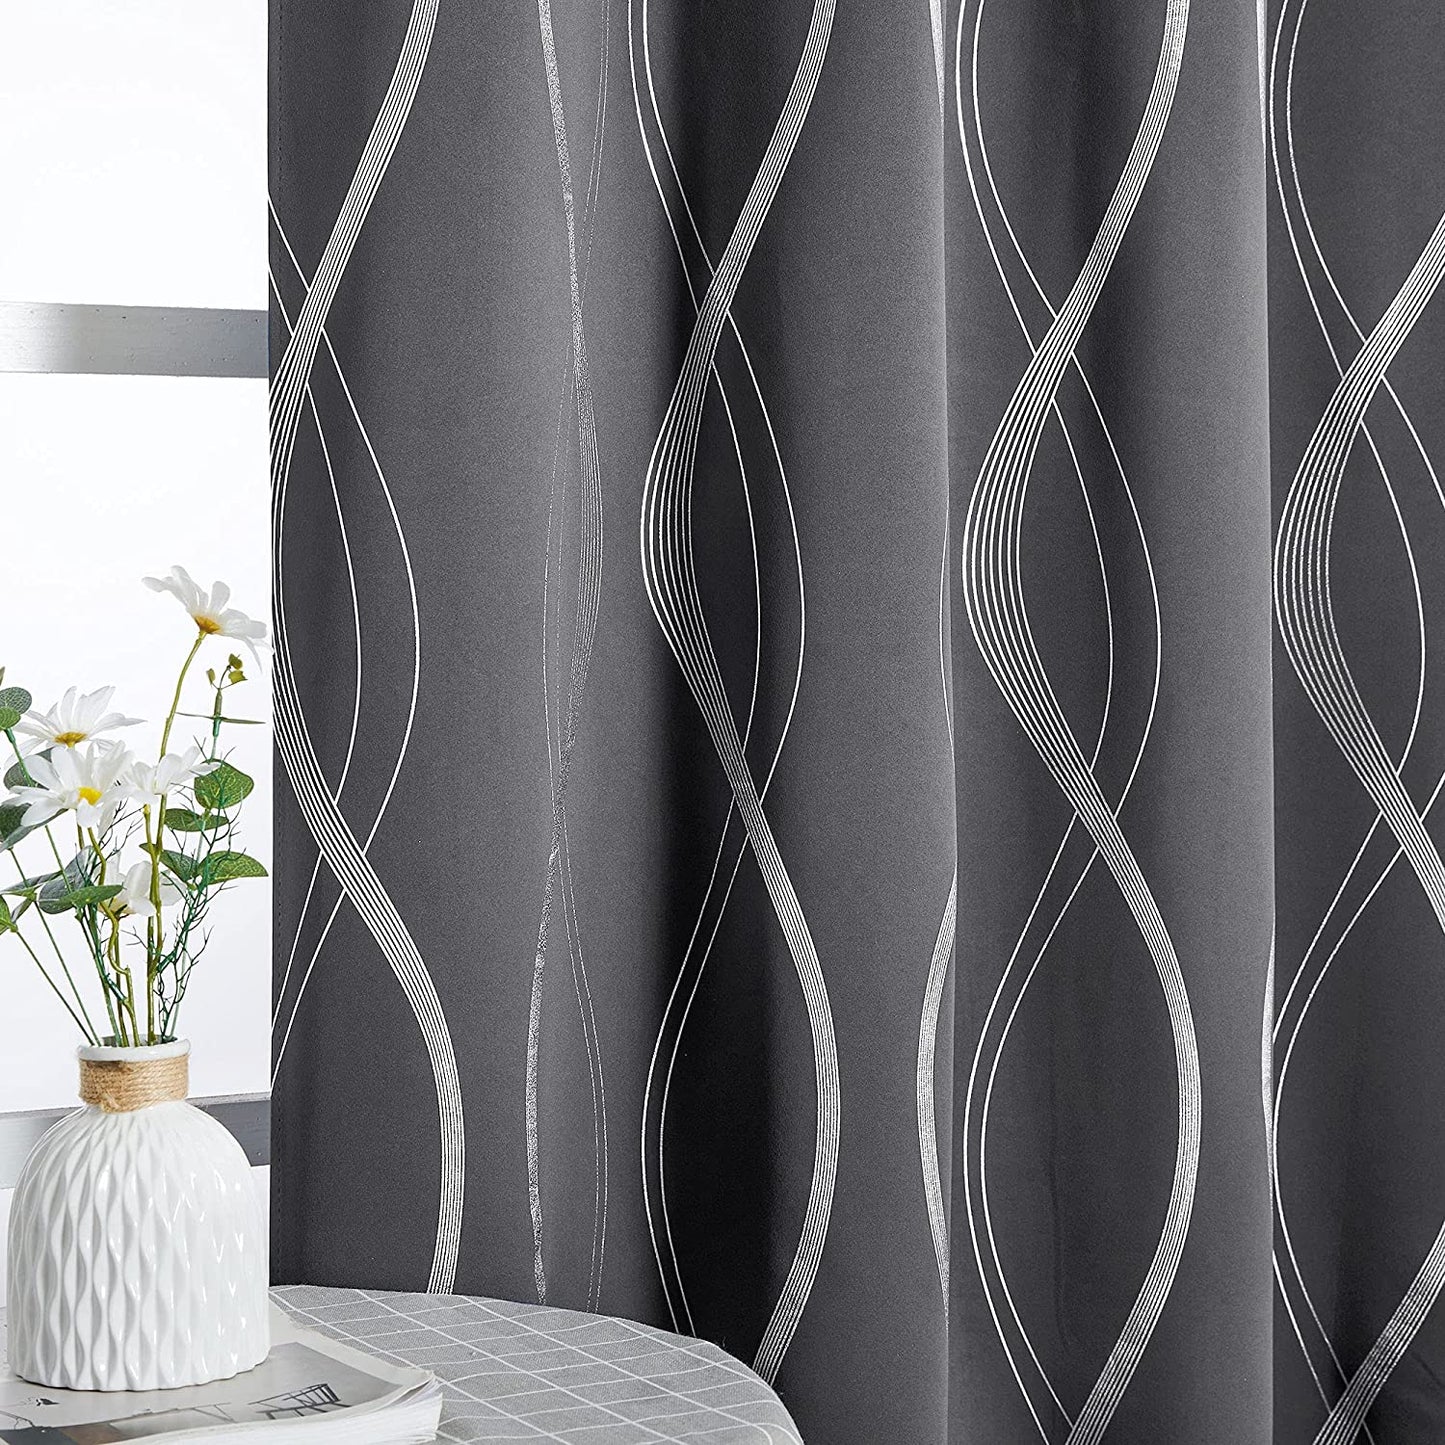 NICETOWN Grey Blackout Curtains 84 Inch Length 2 Panels Set for Bedroom/Living Room, Noise Reducing Thermal Insulated Wave Line Foil Print Drapes for Patio Sliding Glass Door (52 X 84, Gray)  NICETOWN Grey 42"W X 84"L 